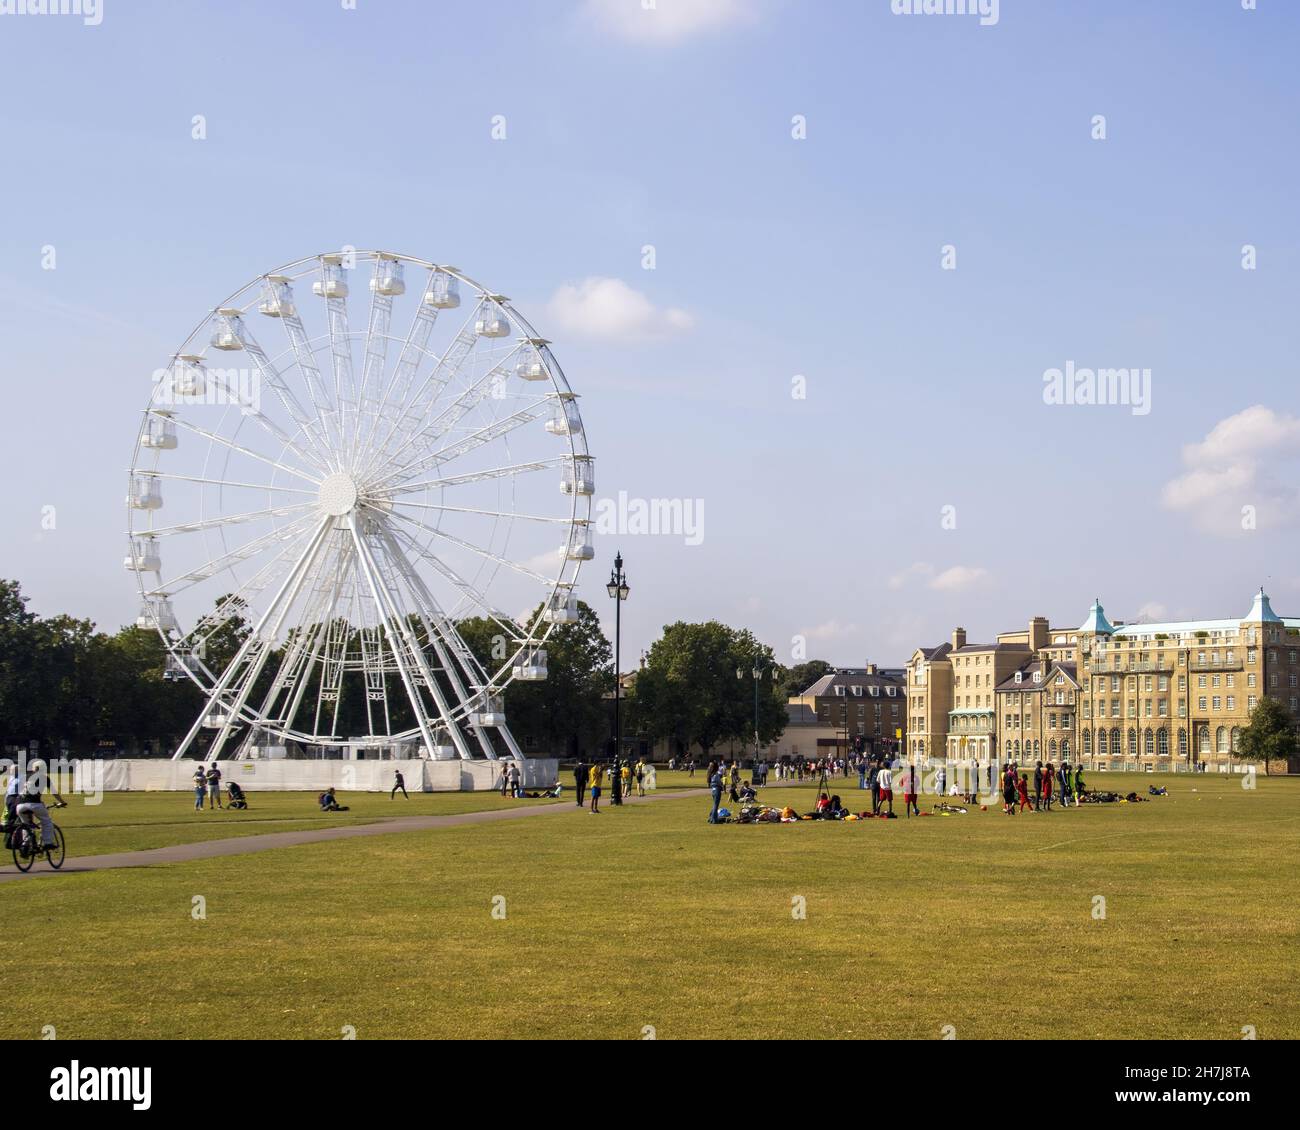 CAMBRIDGE, UNITED KINGDOM - Sep 21, 2021: The Ferris wheel in the middle of an open common with the University Arms Hotel Stock Photo